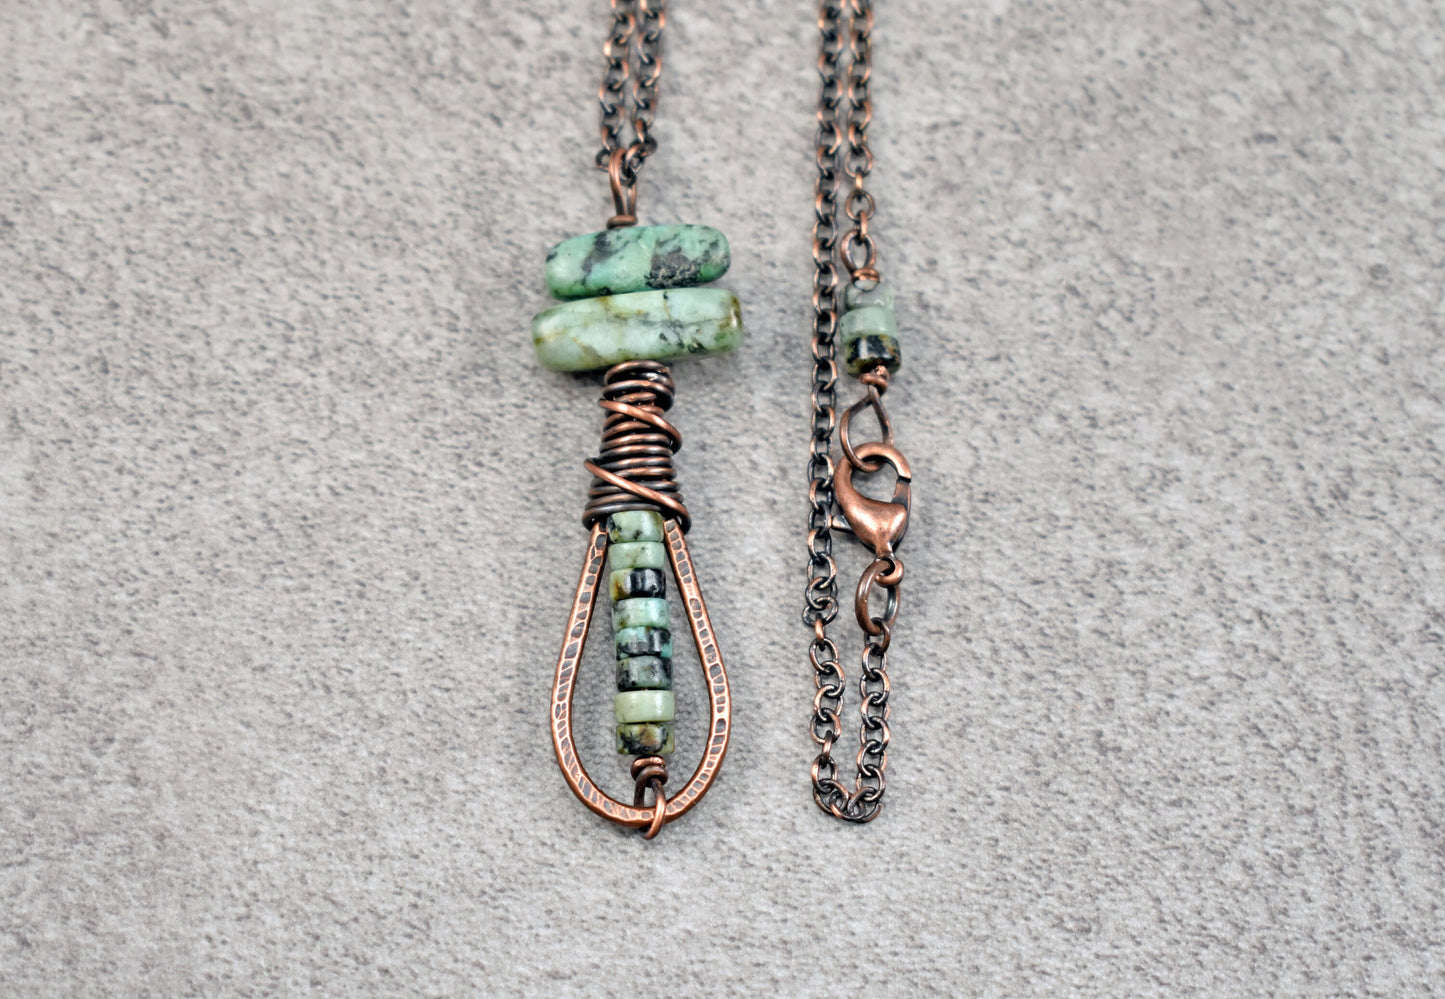 African Turquoise Jasper Pendant, Earthy Green Gemstone Necklace, Artisan Copper Wire Teardrop Jewelry, Unique Natural Stone